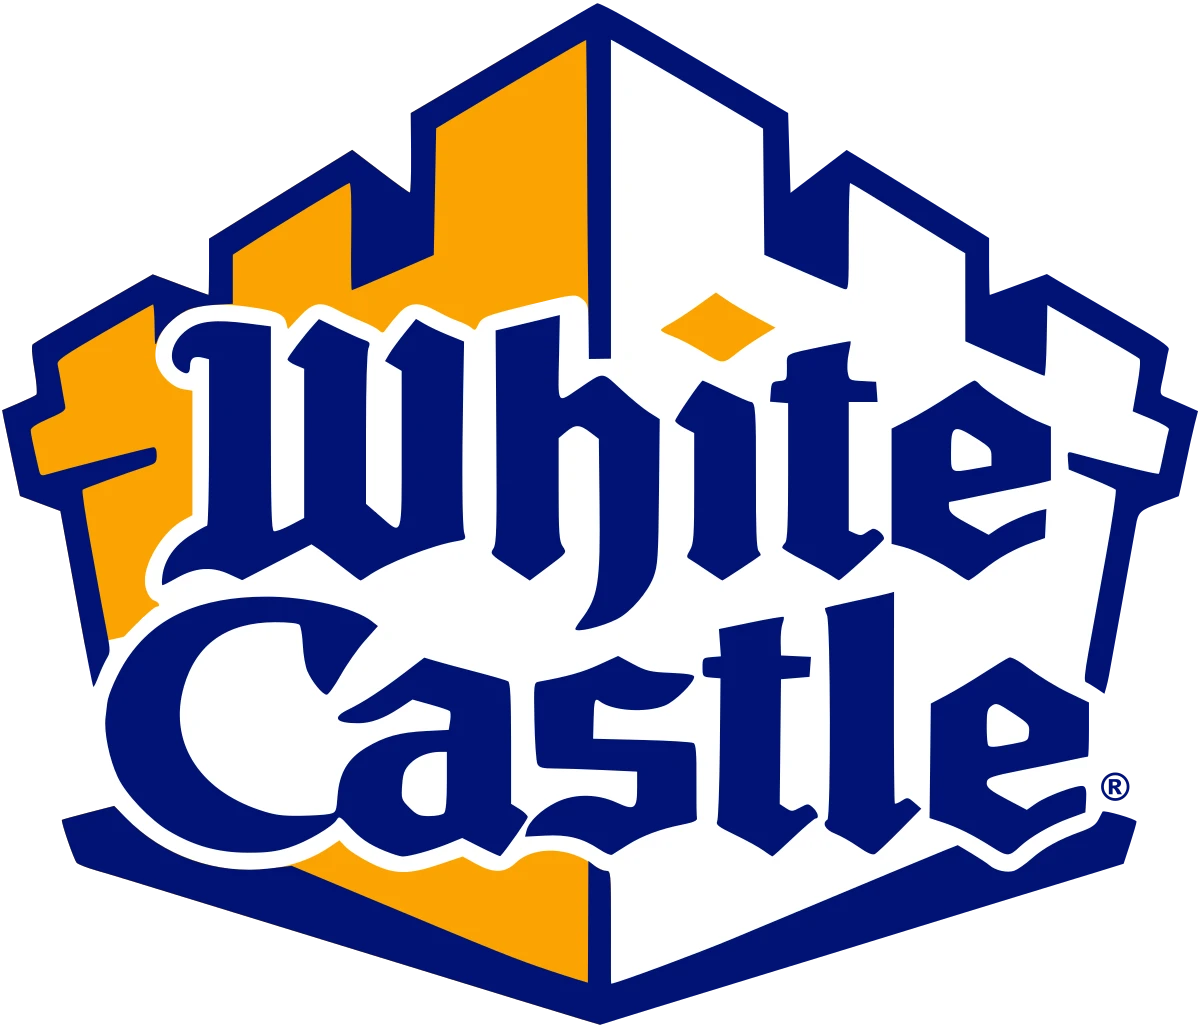 Decorative photo - White Castle logo - indicating Impossible Foods' products are available at this restaurant/store